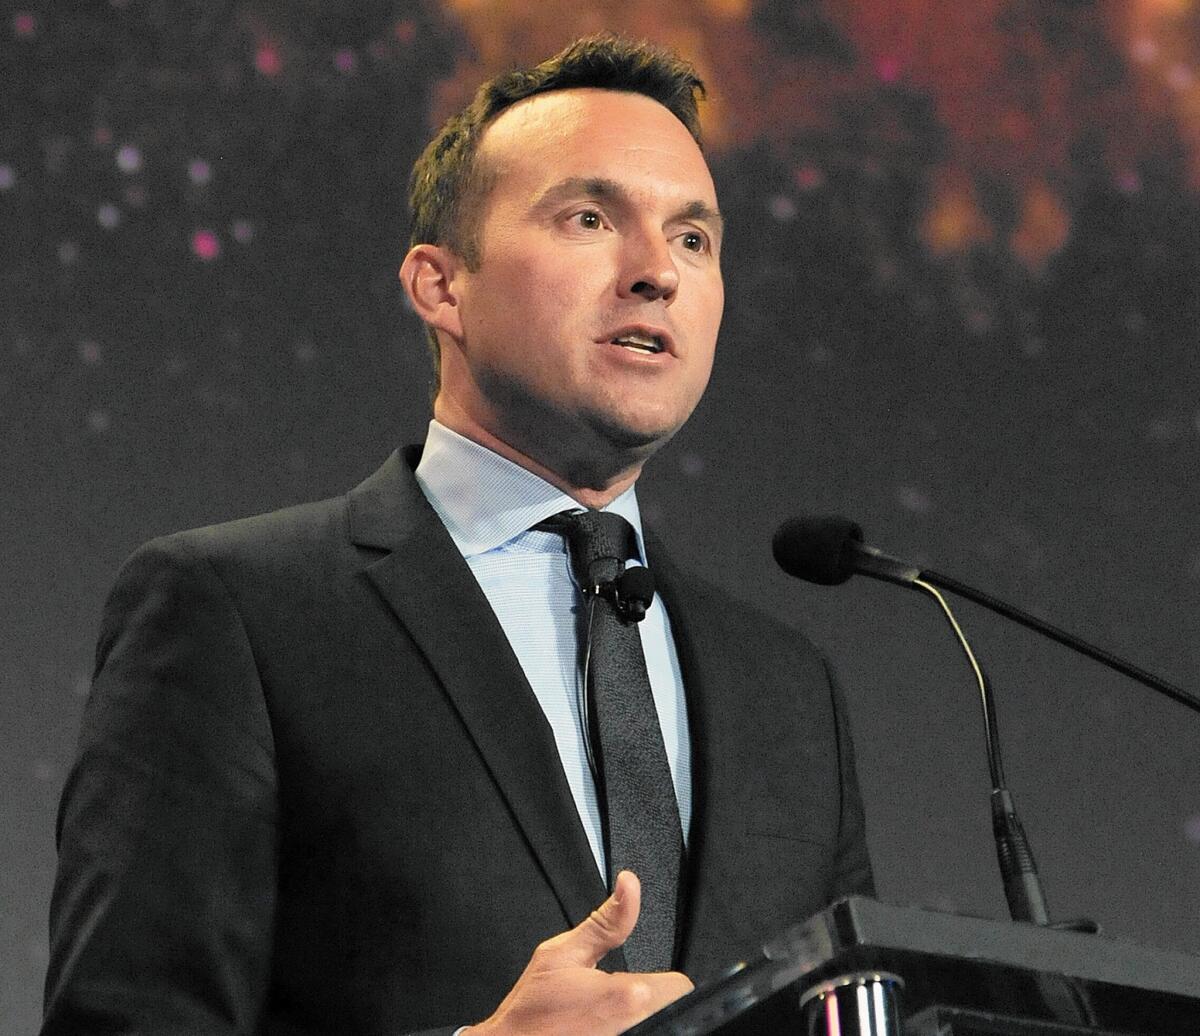 Eric Fanning's nomination is arguably the biggest symbolic move by the Obama administration to lift historic barriers against women and LGBT individuals seeking to serve in the U.S. military.